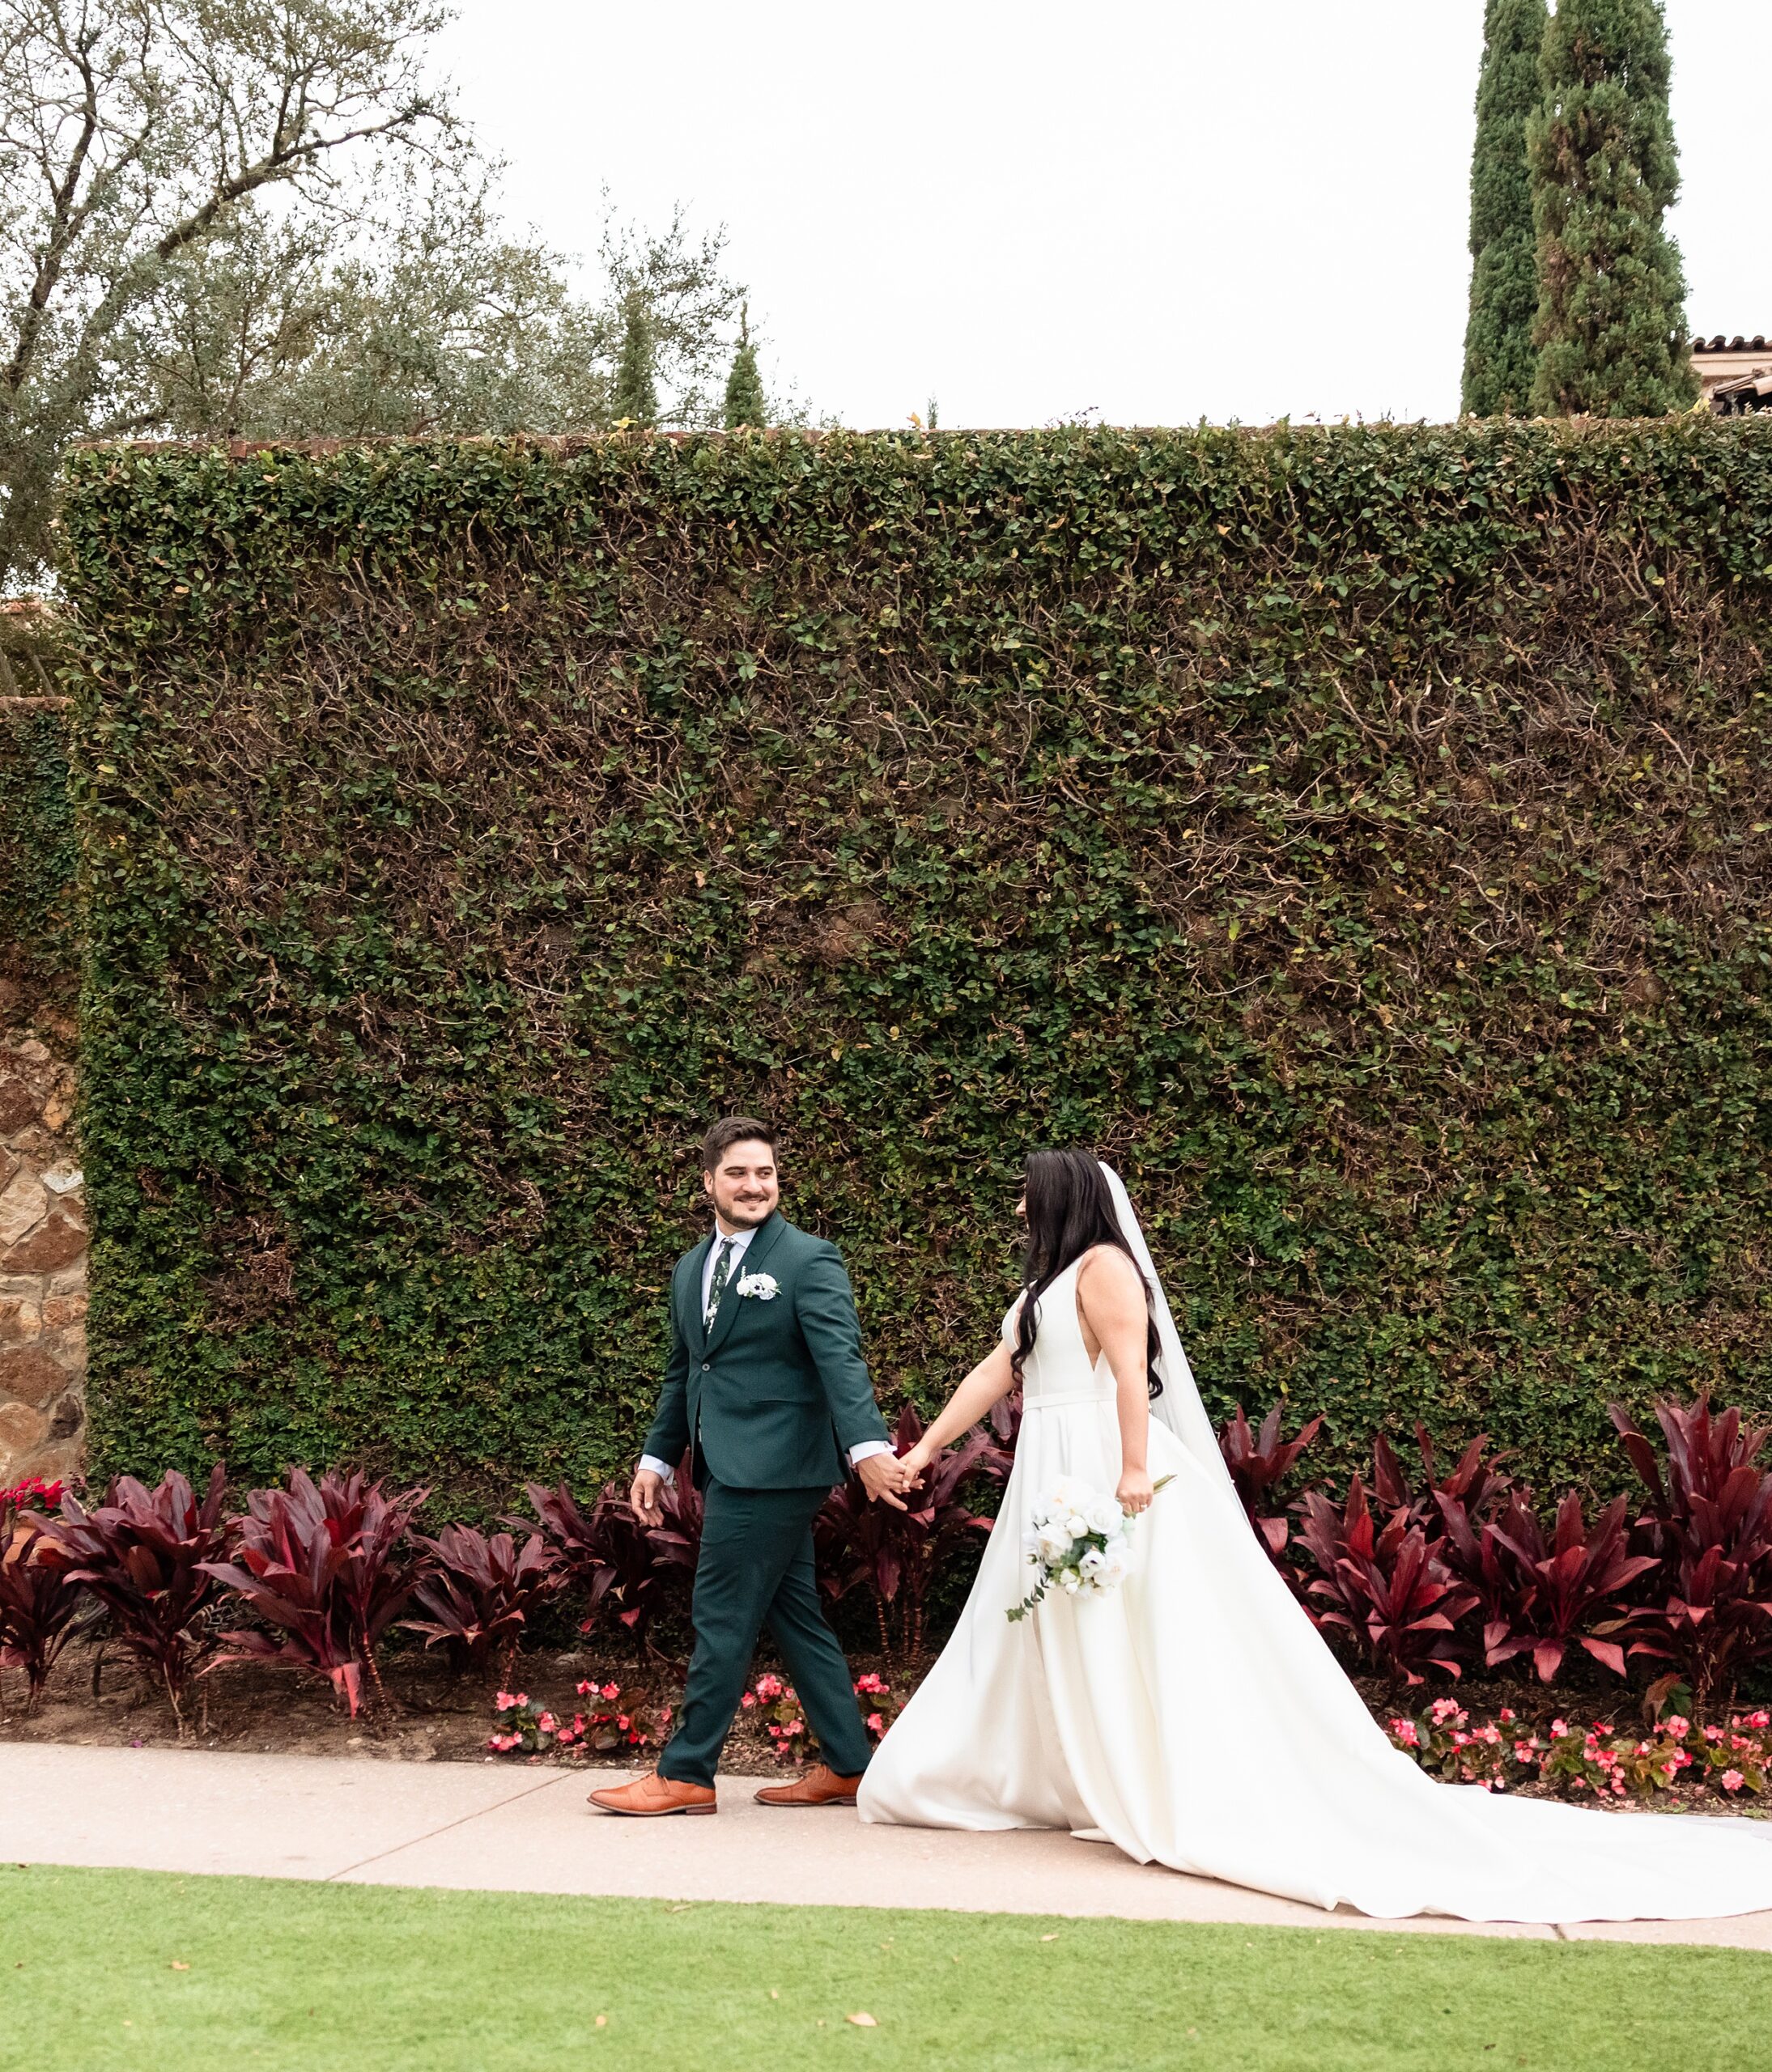 A groom in a green suit leads his bride up a garden sidewalk by the hand thanks to st augustine wedding planners